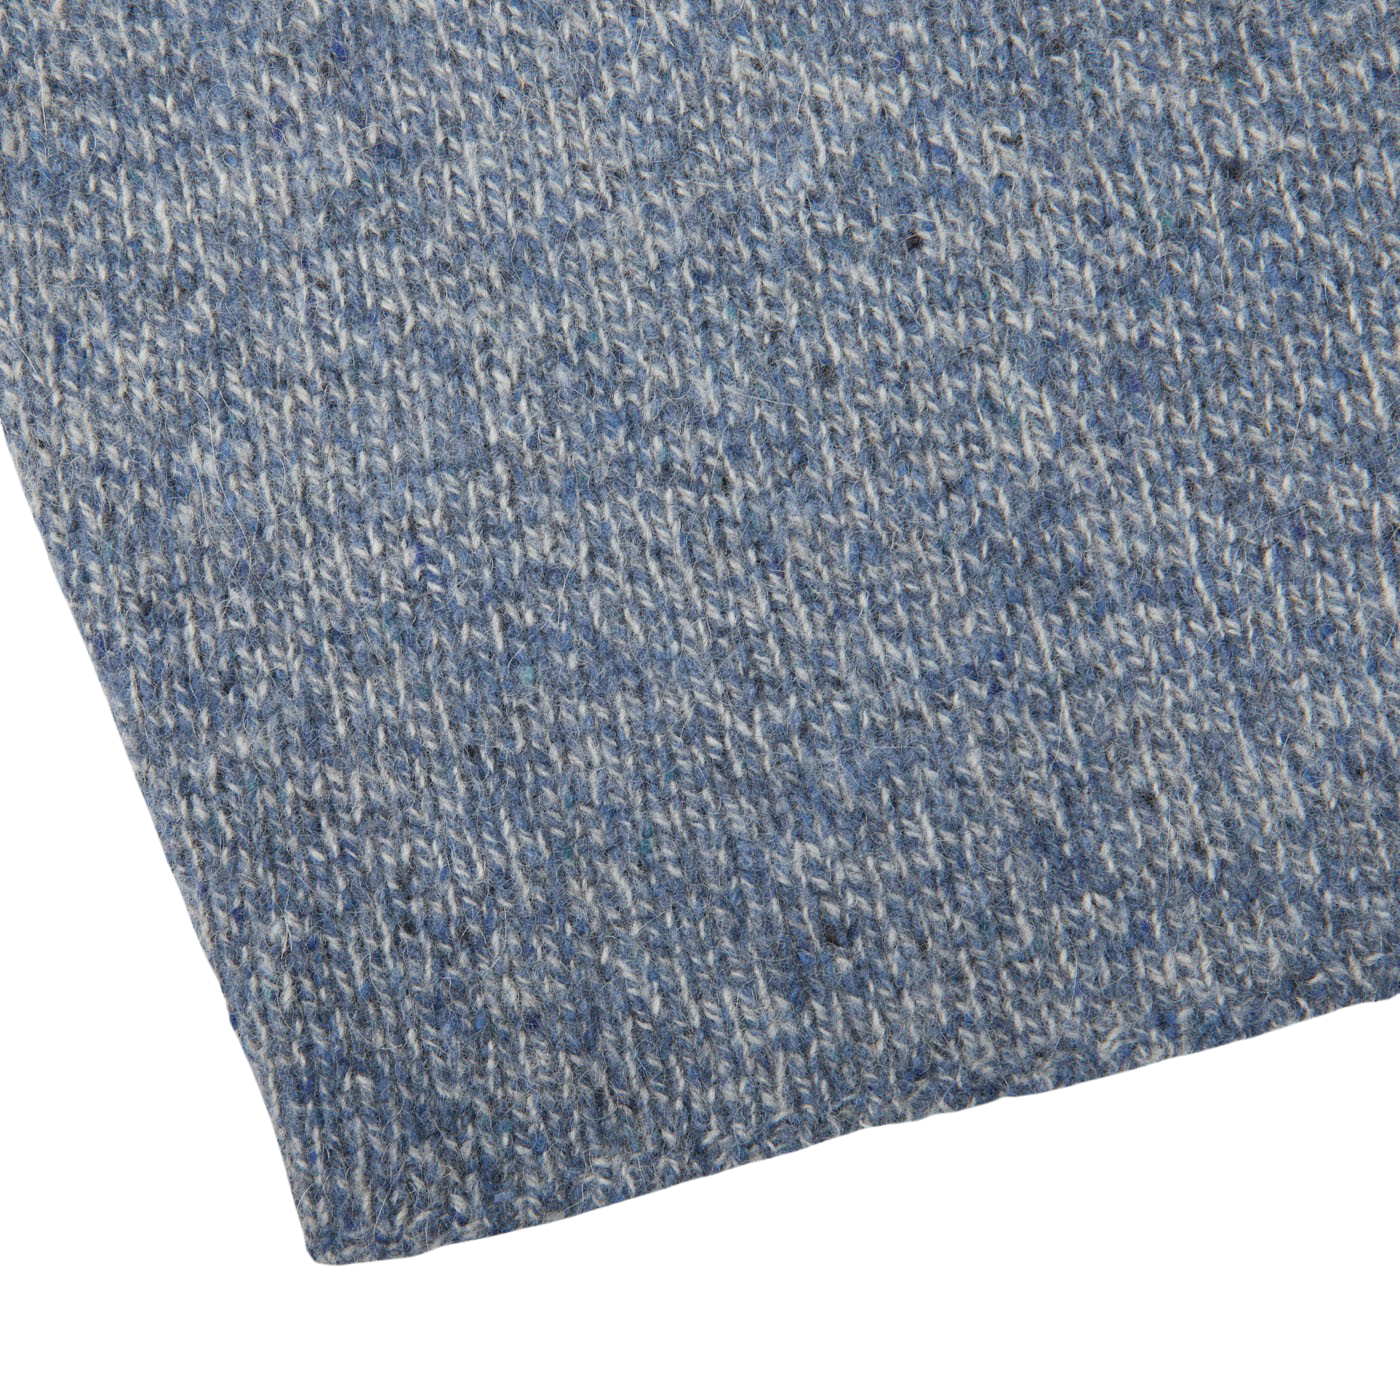 A close up image of an Alan Paine Blue Spreckle Wool Alpaca Tweed Roll Neck shirt.